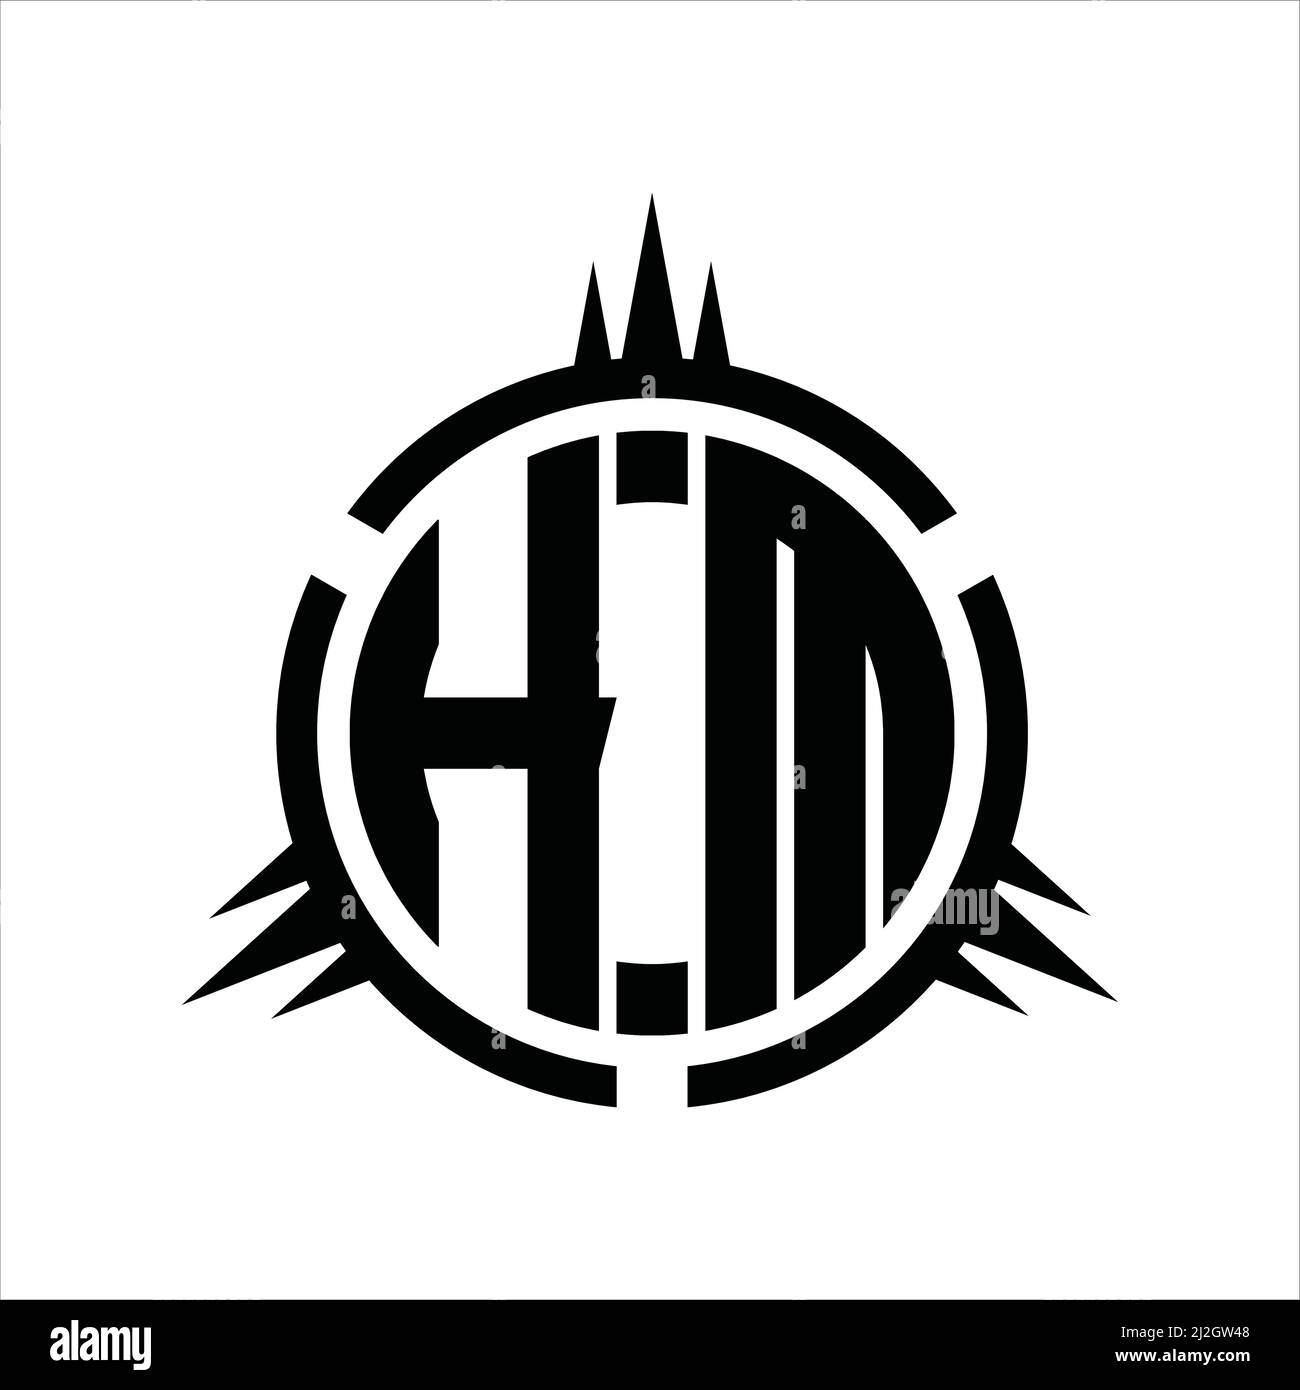 HM Logo monogram isolated on circle element design template Stock Vector